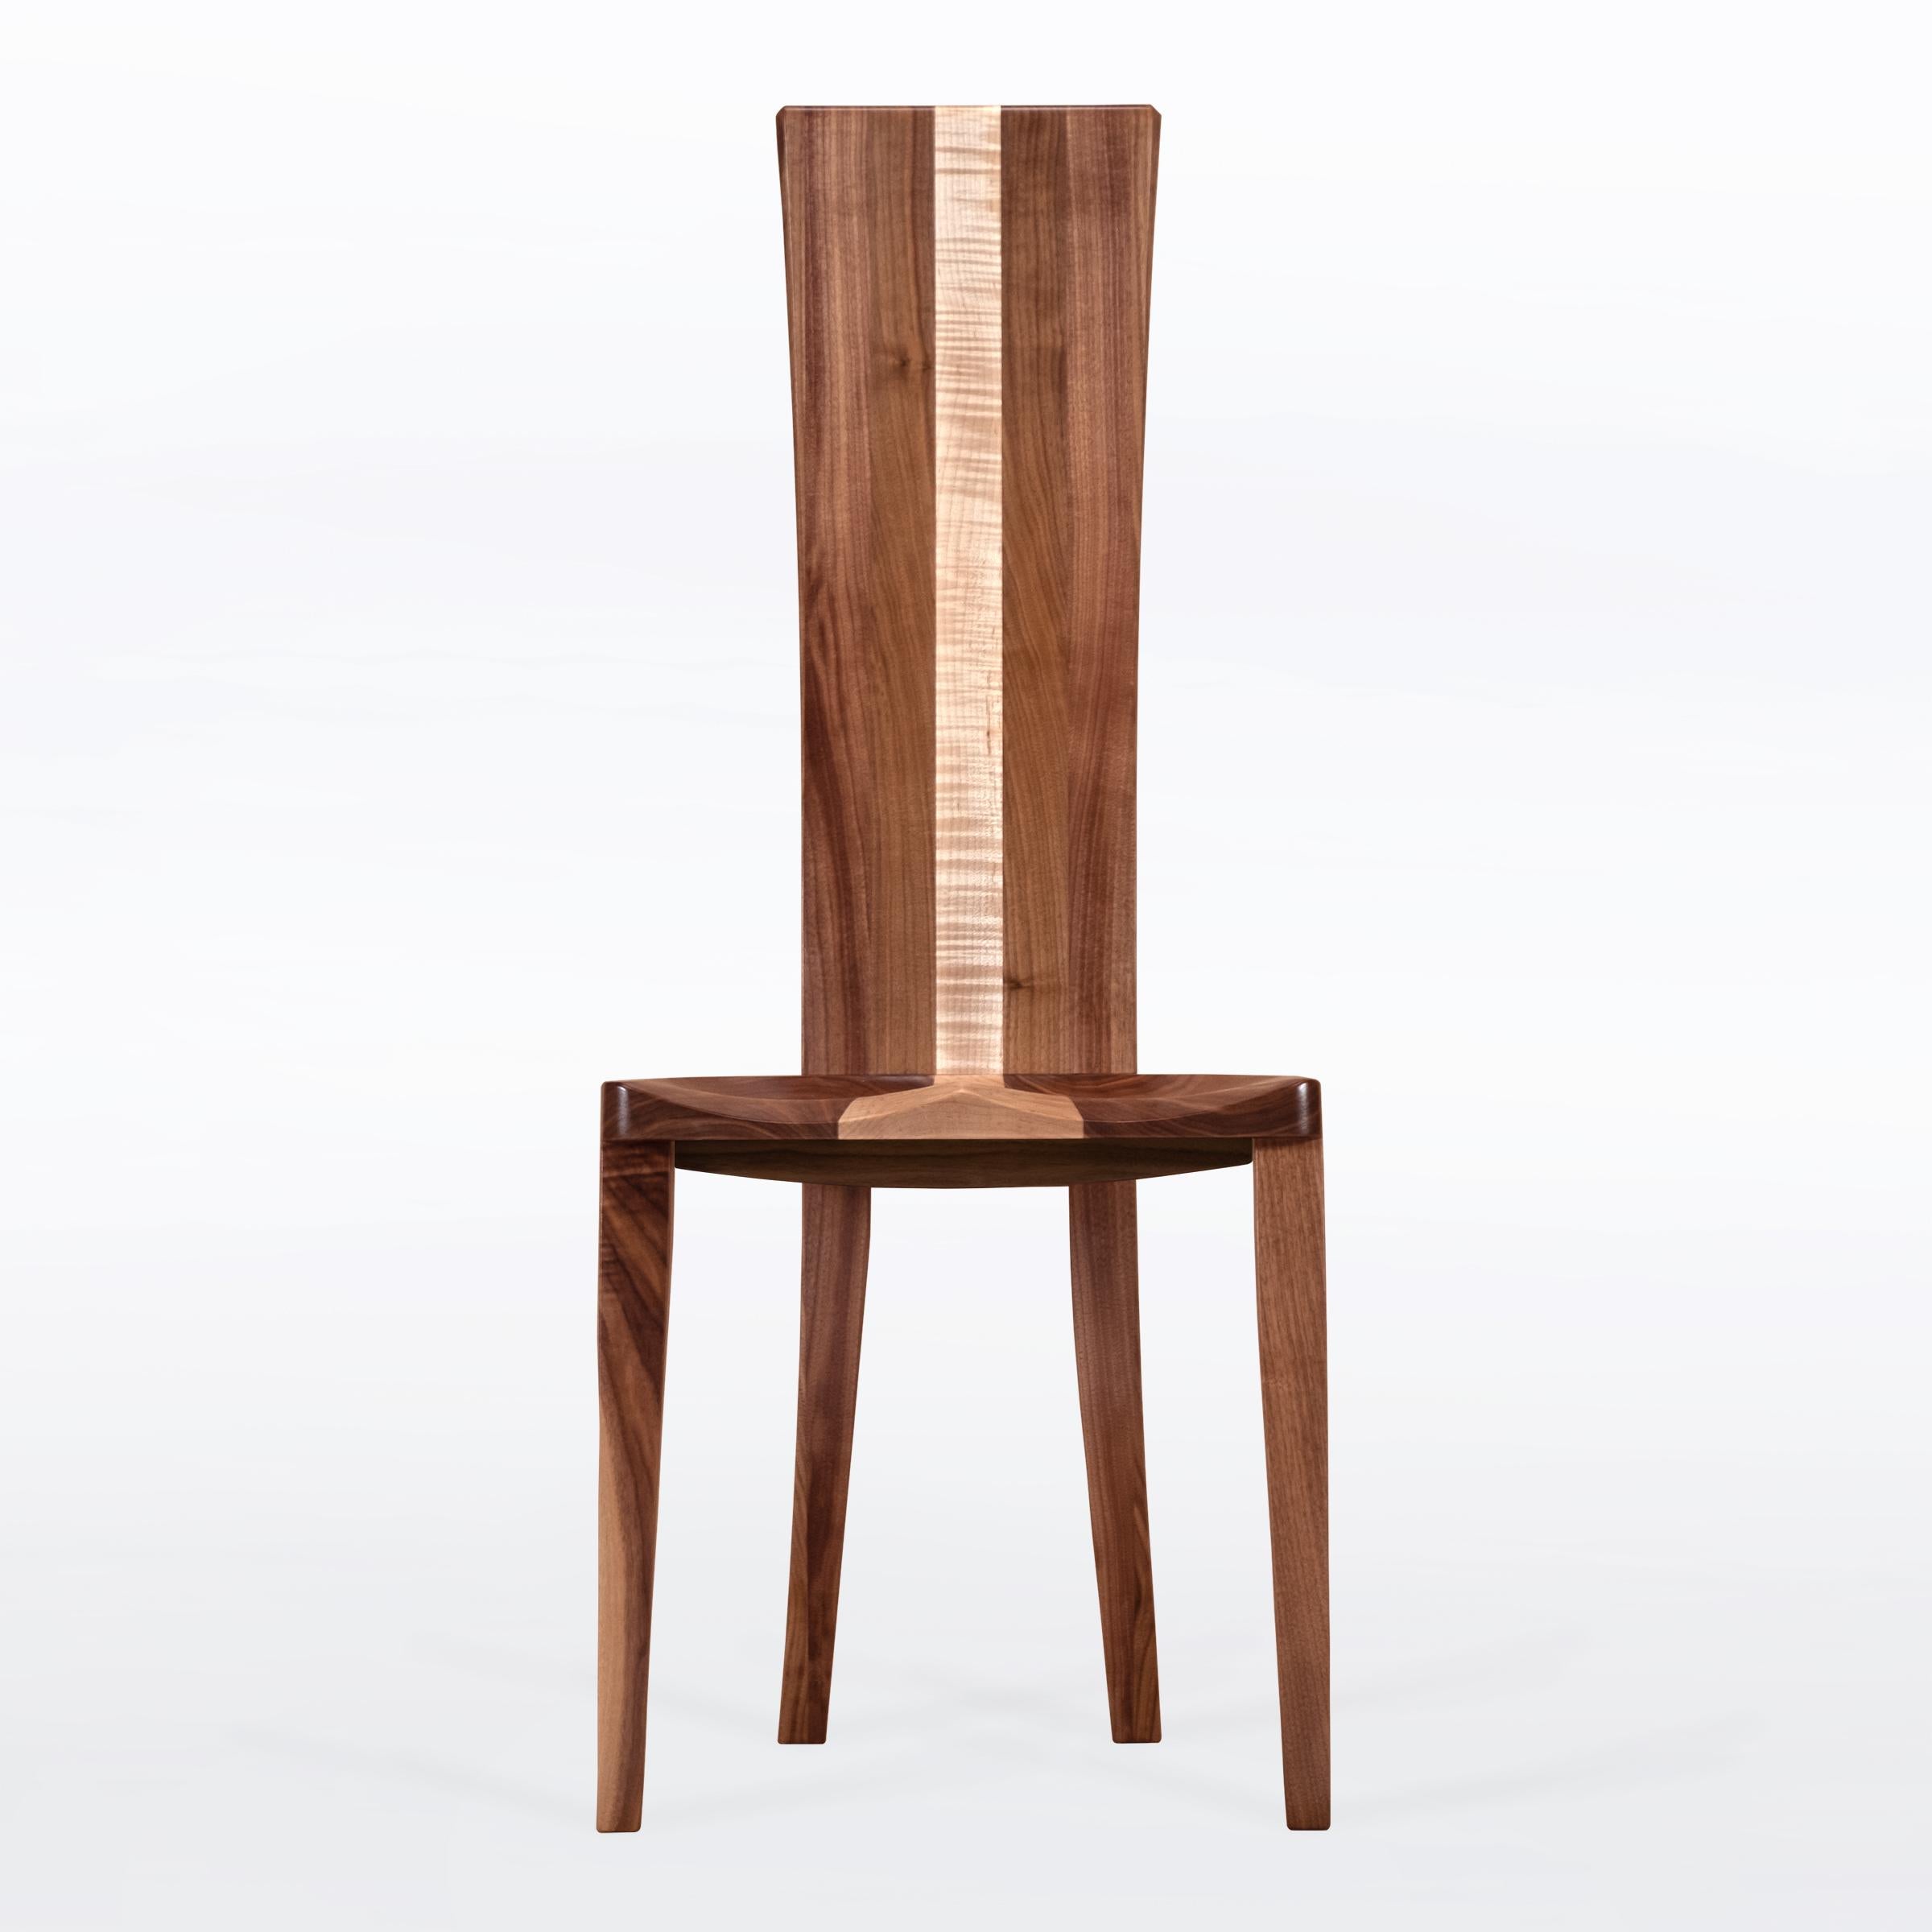 This dining chair in mid-century modern style (